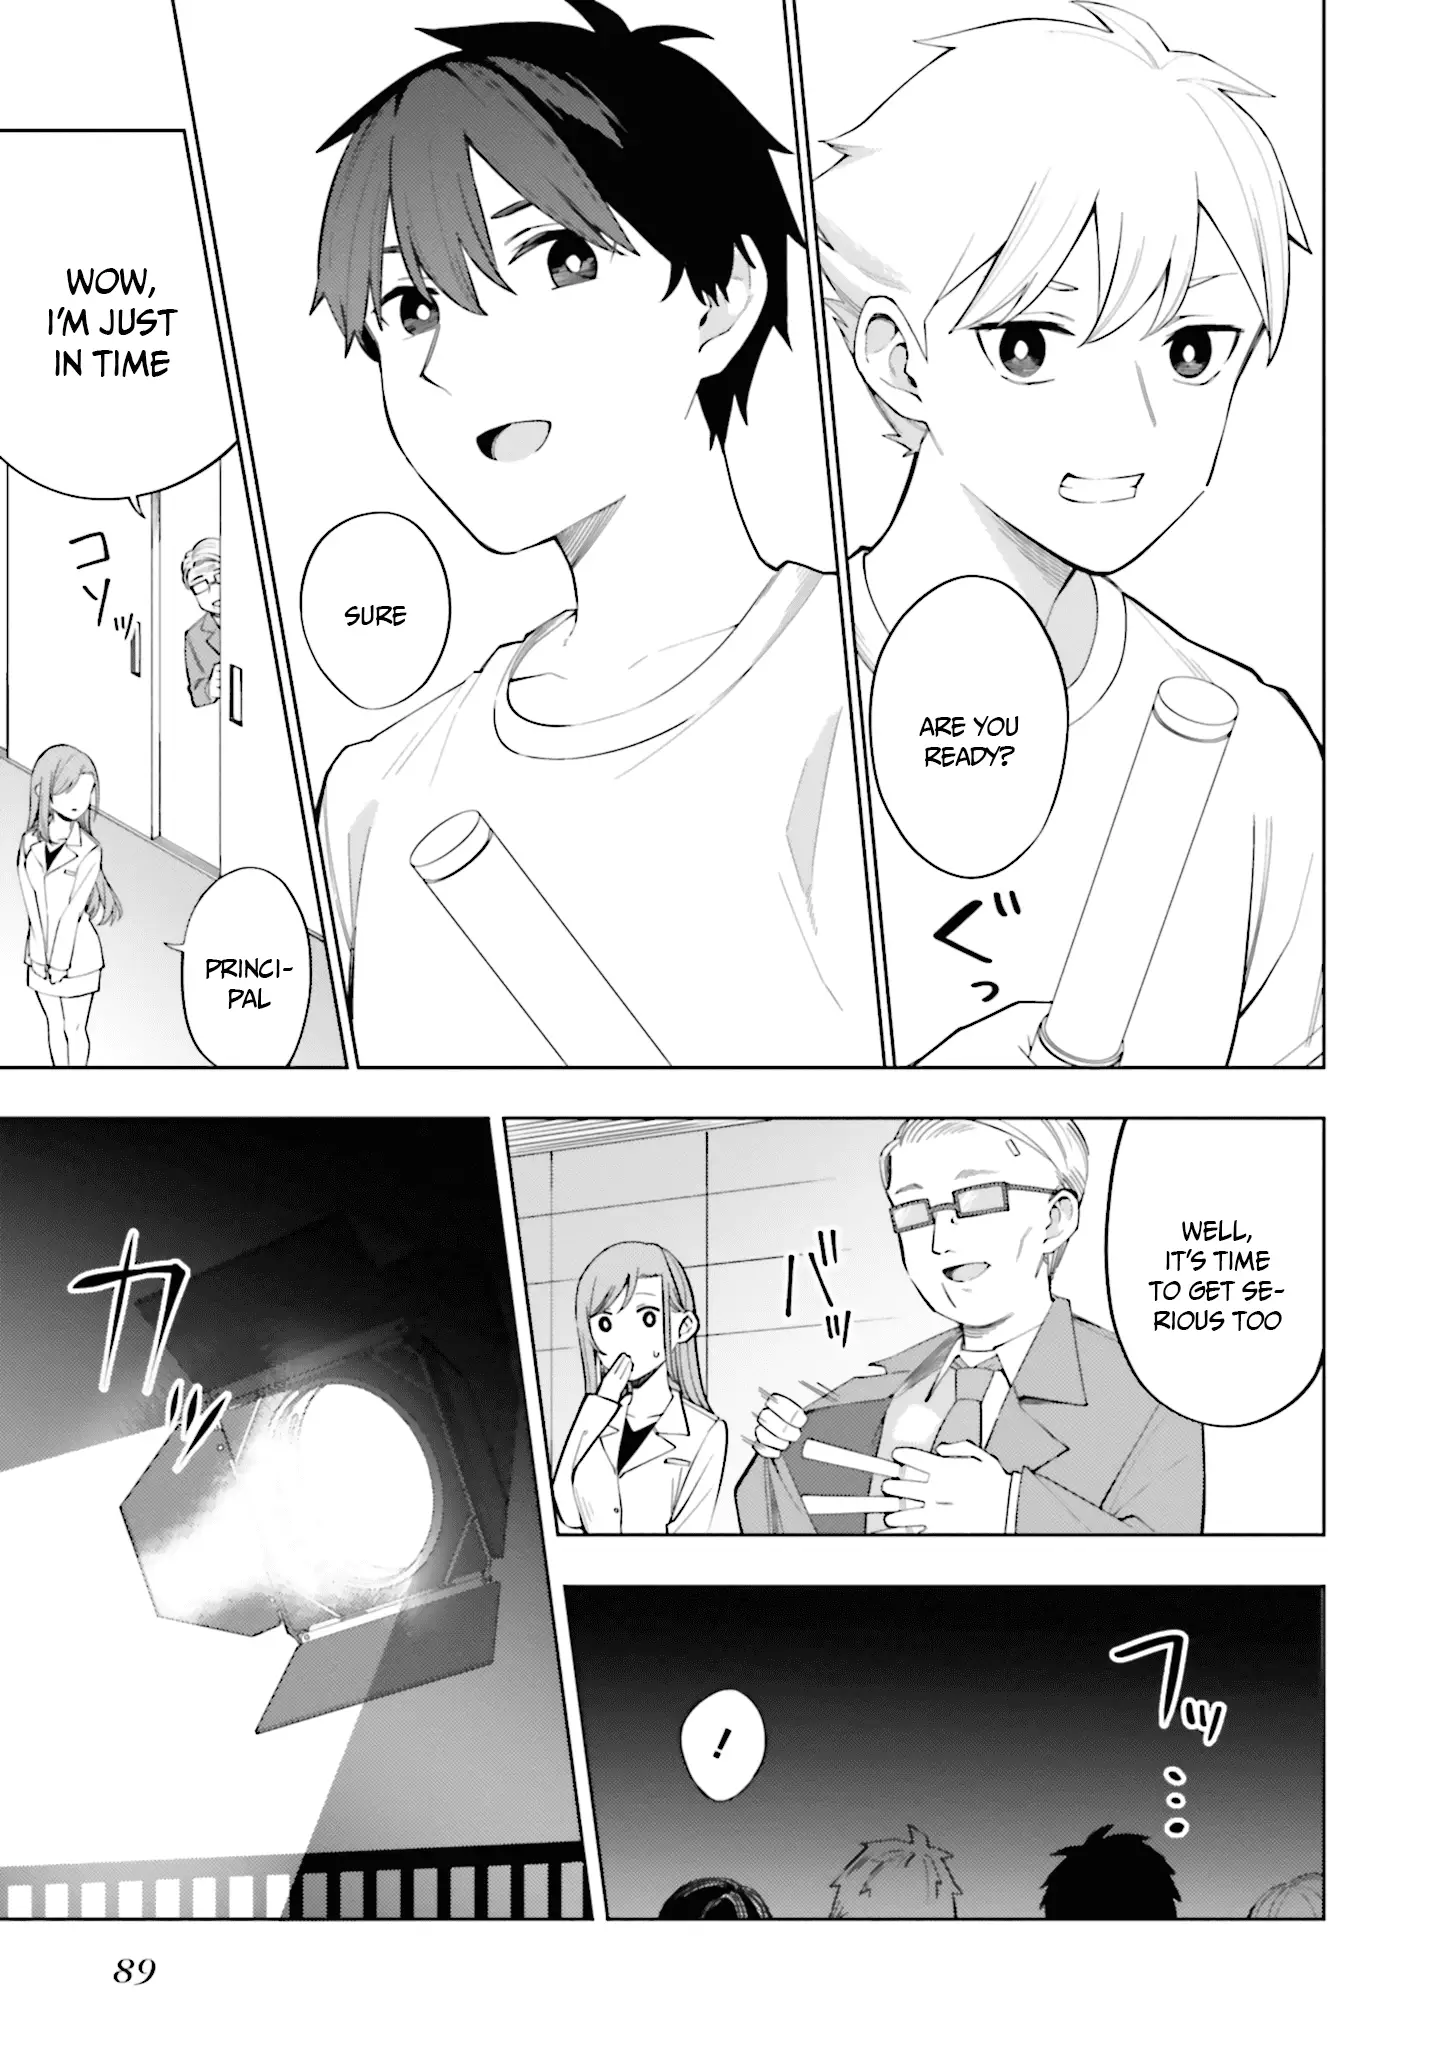 I Don't Understand Shirogane-San's Facial Expression At All - 15 page 34-6fa165cf